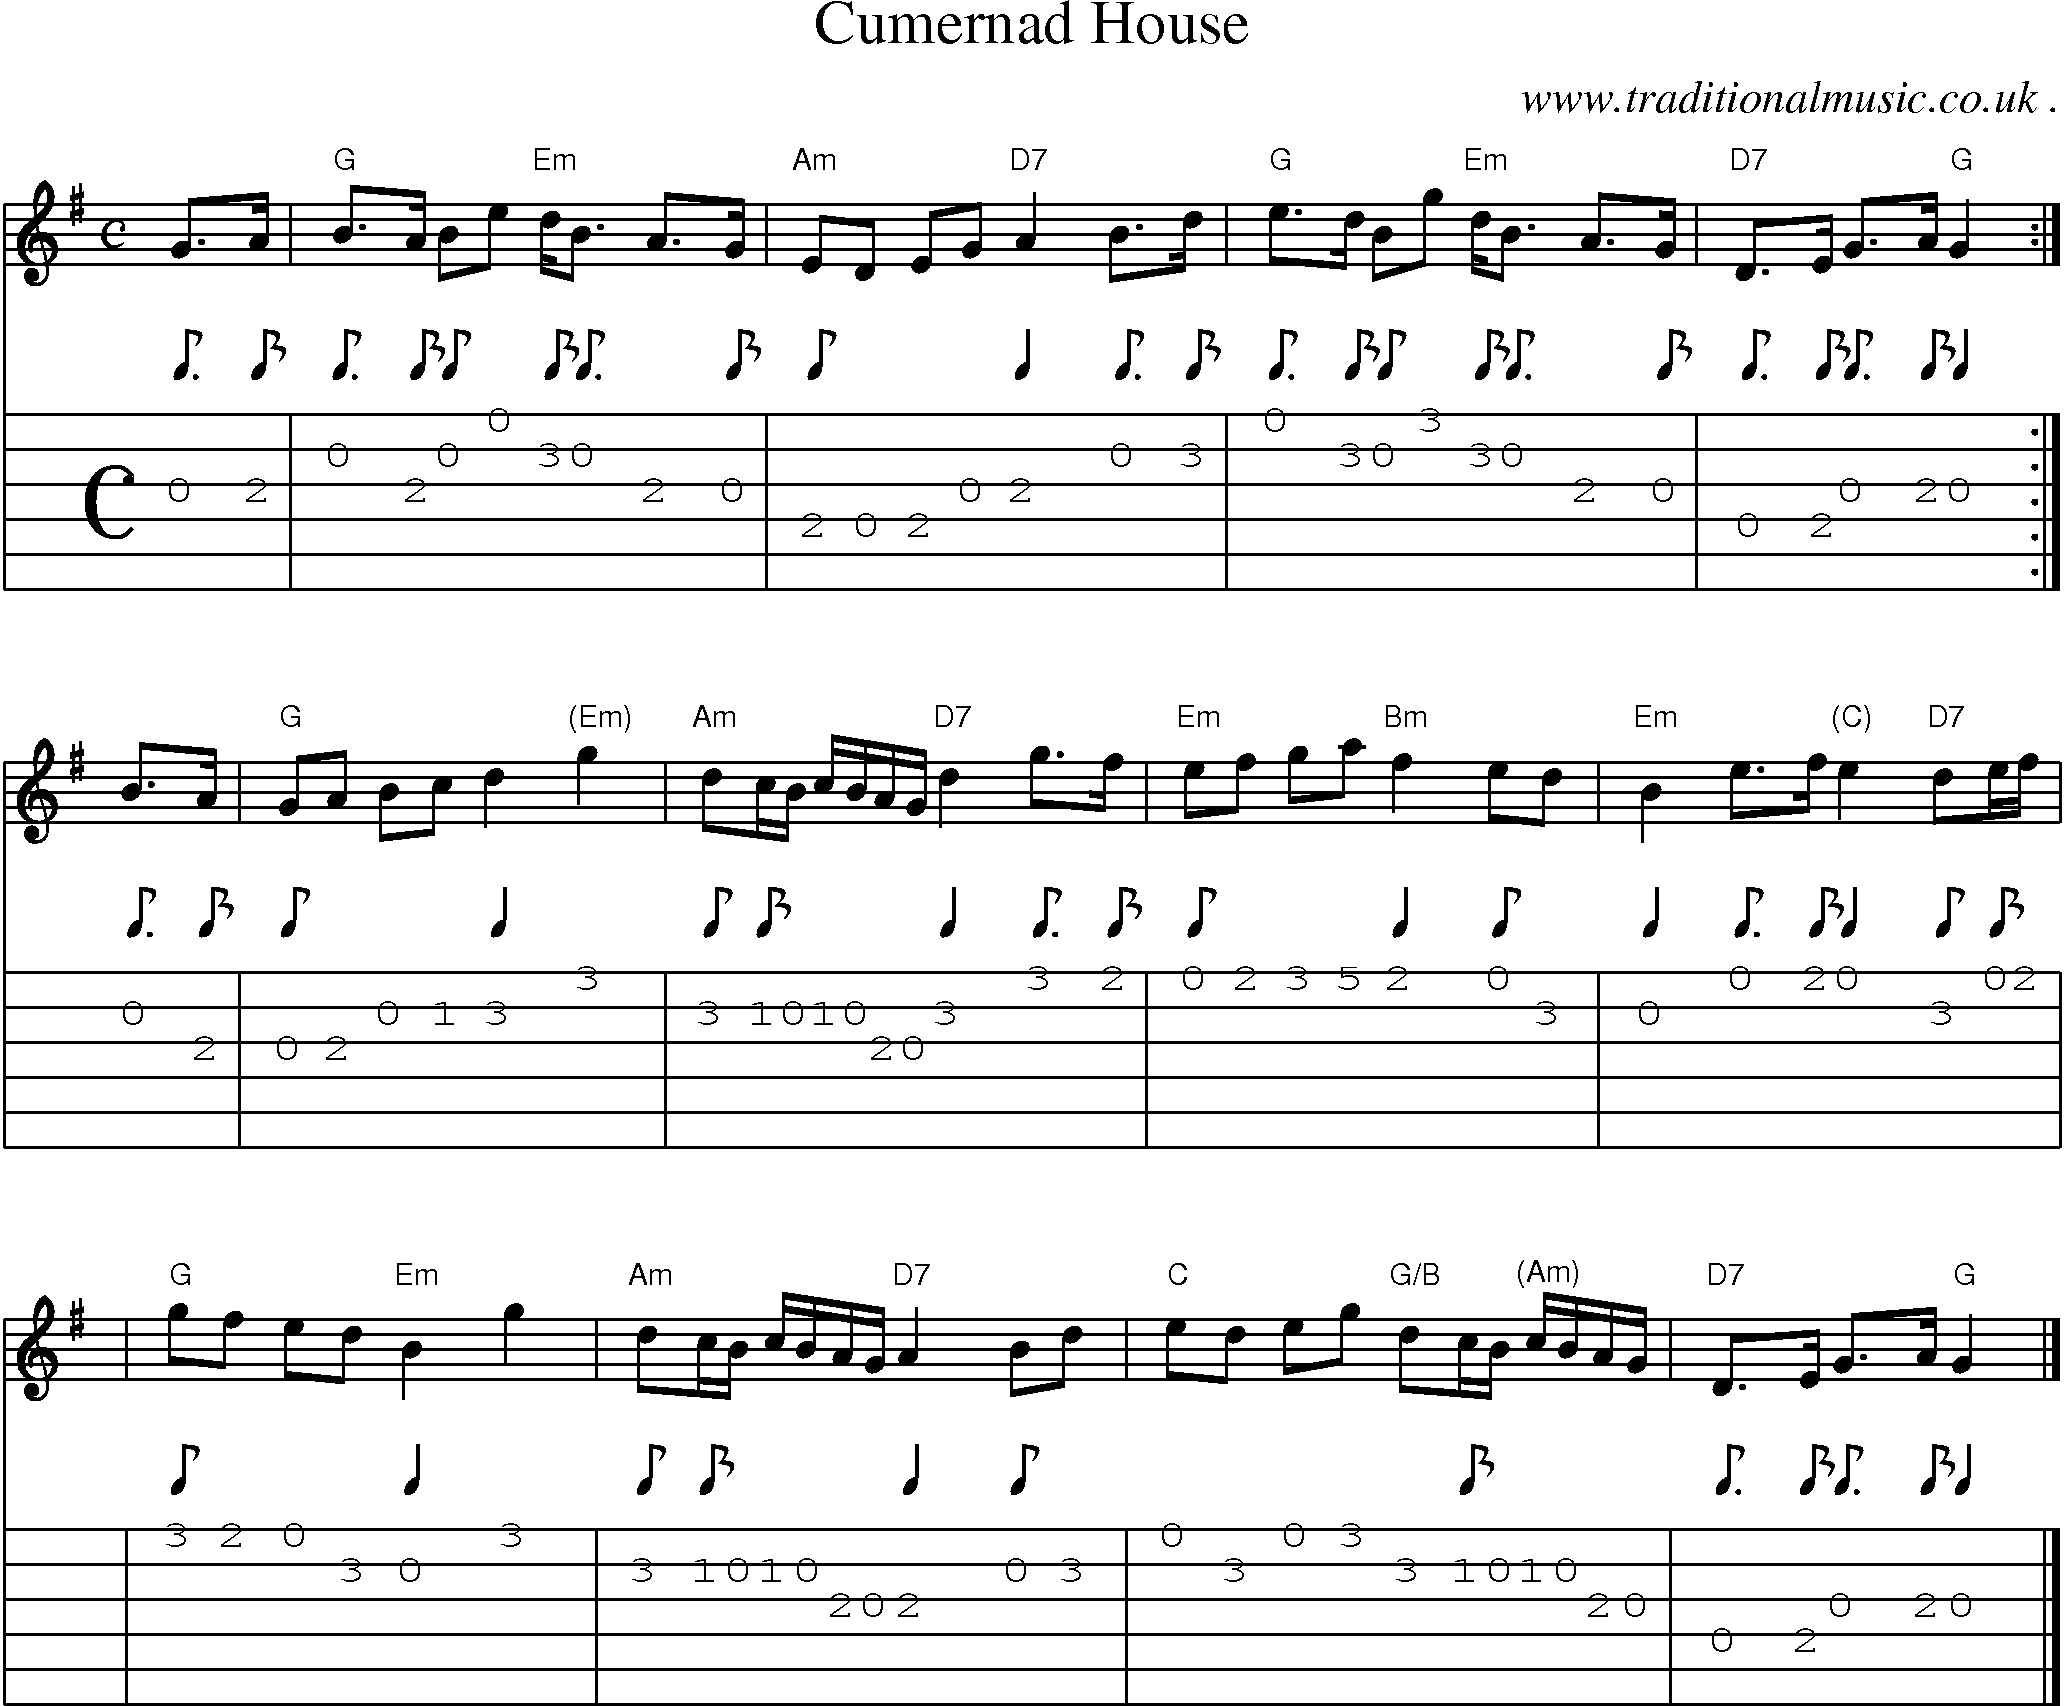 Sheet-music  score, Chords and Guitar Tabs for Cumernad House